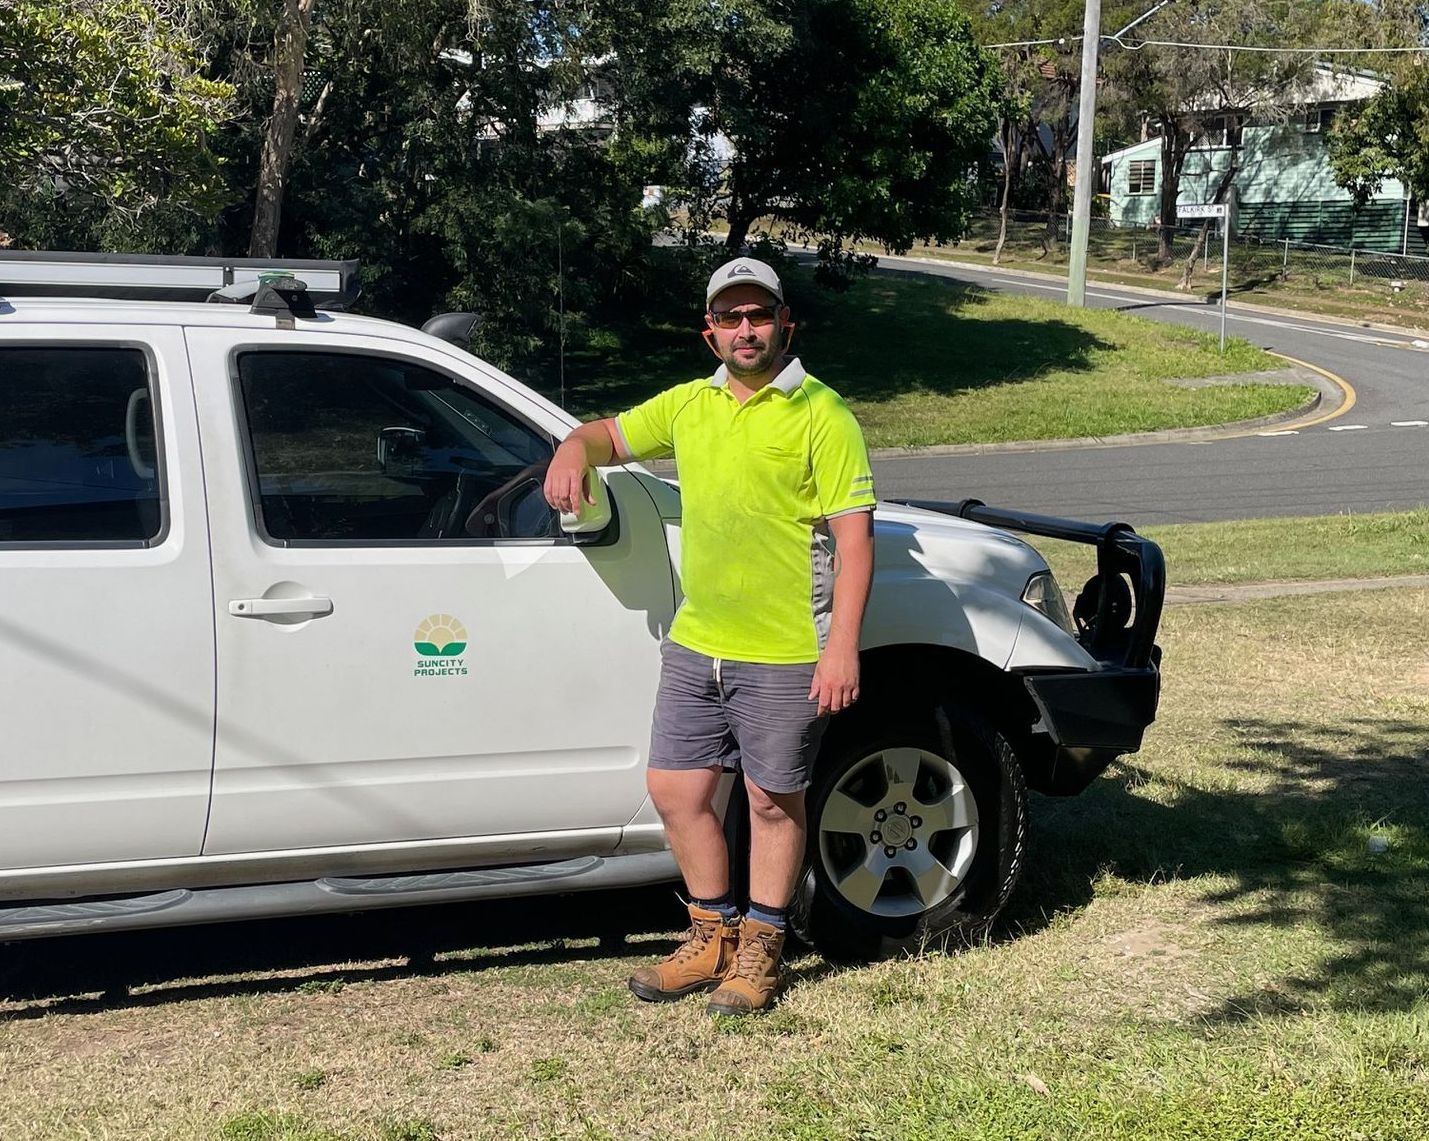 Mowbuddy Mitchell standing outside his ute